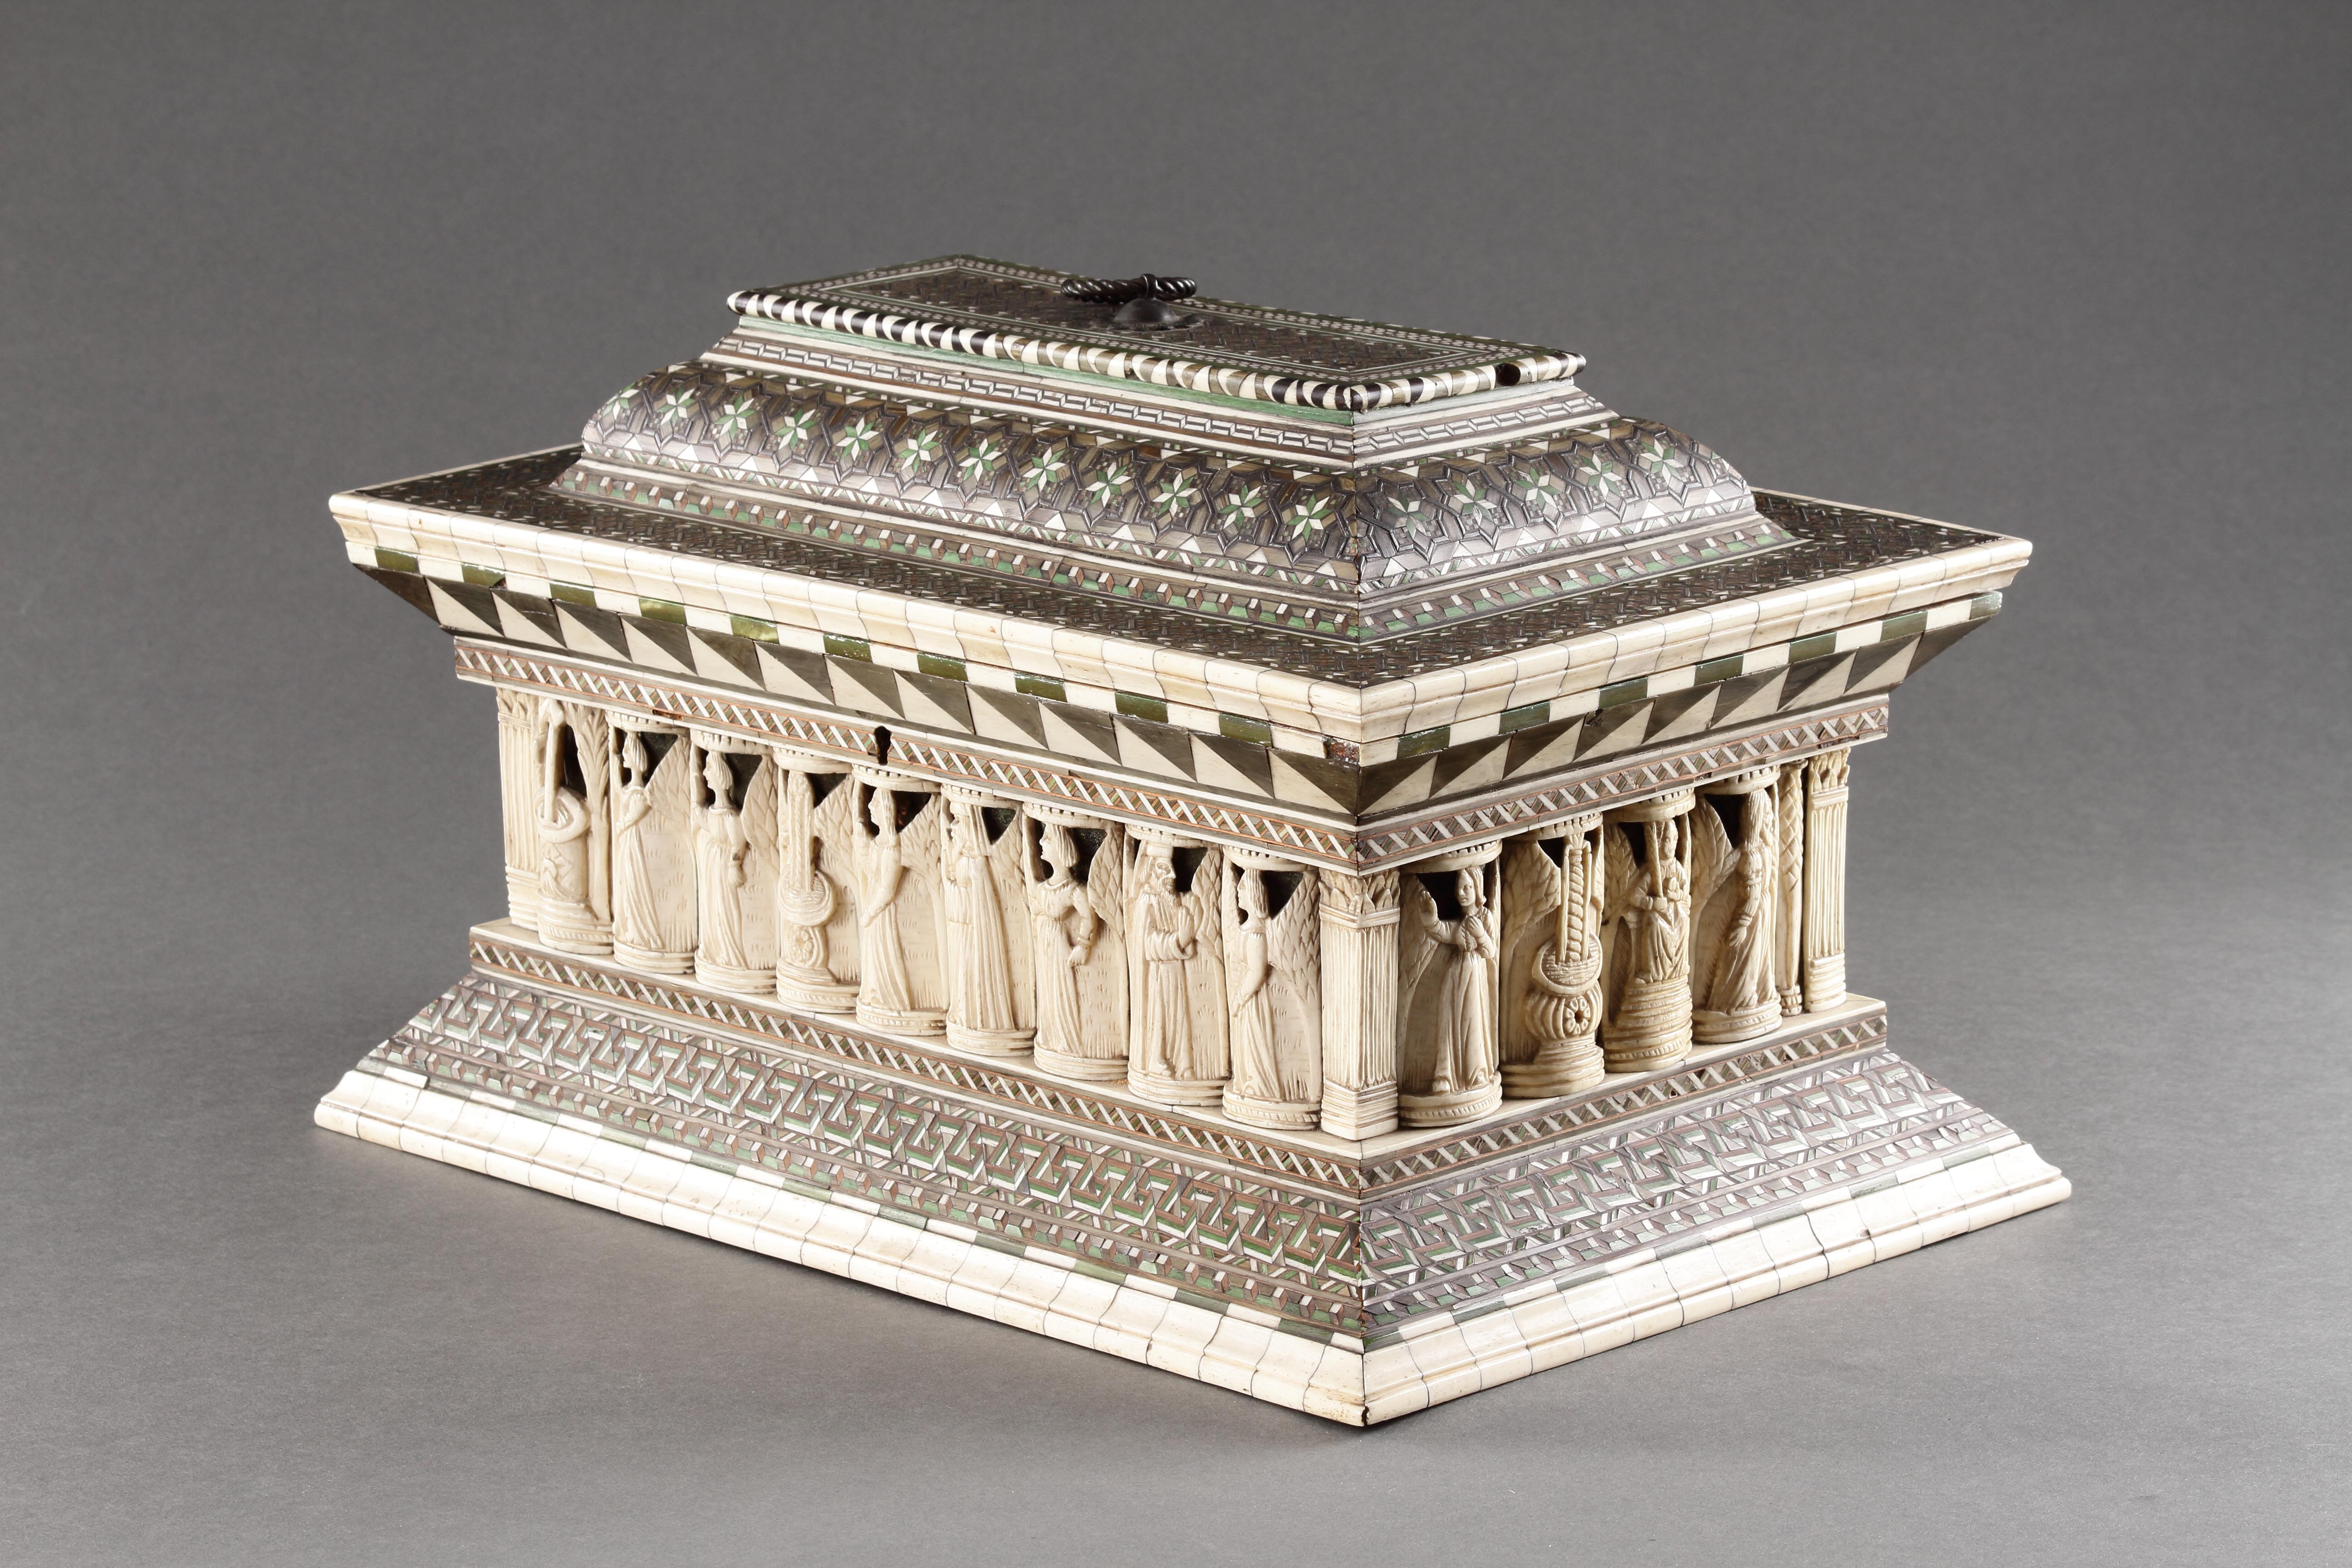 Italian A Rare and Important Sarcophagus ‘Wedding’ Casket For Sale